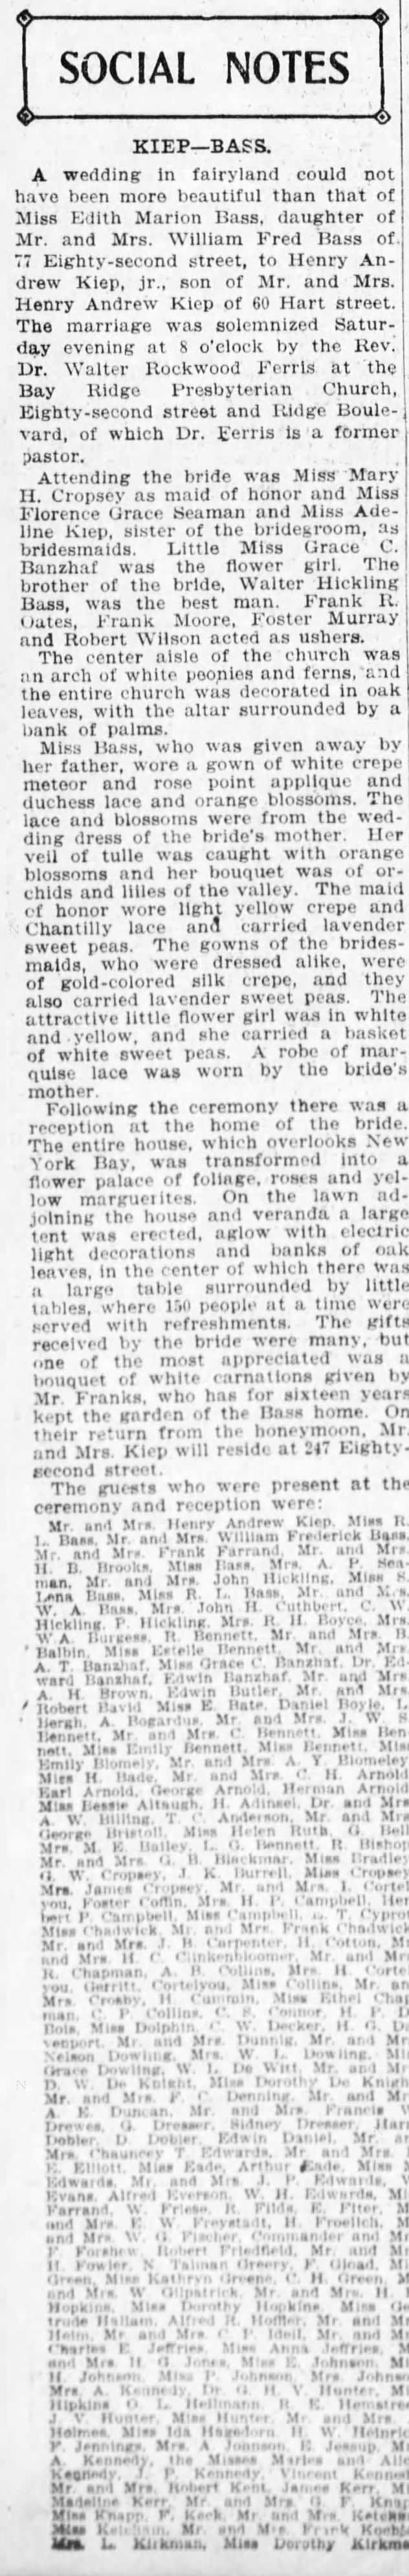 Marriage of Edith Marion Bass to Henry Andrew Kiep, Jr.  part 1